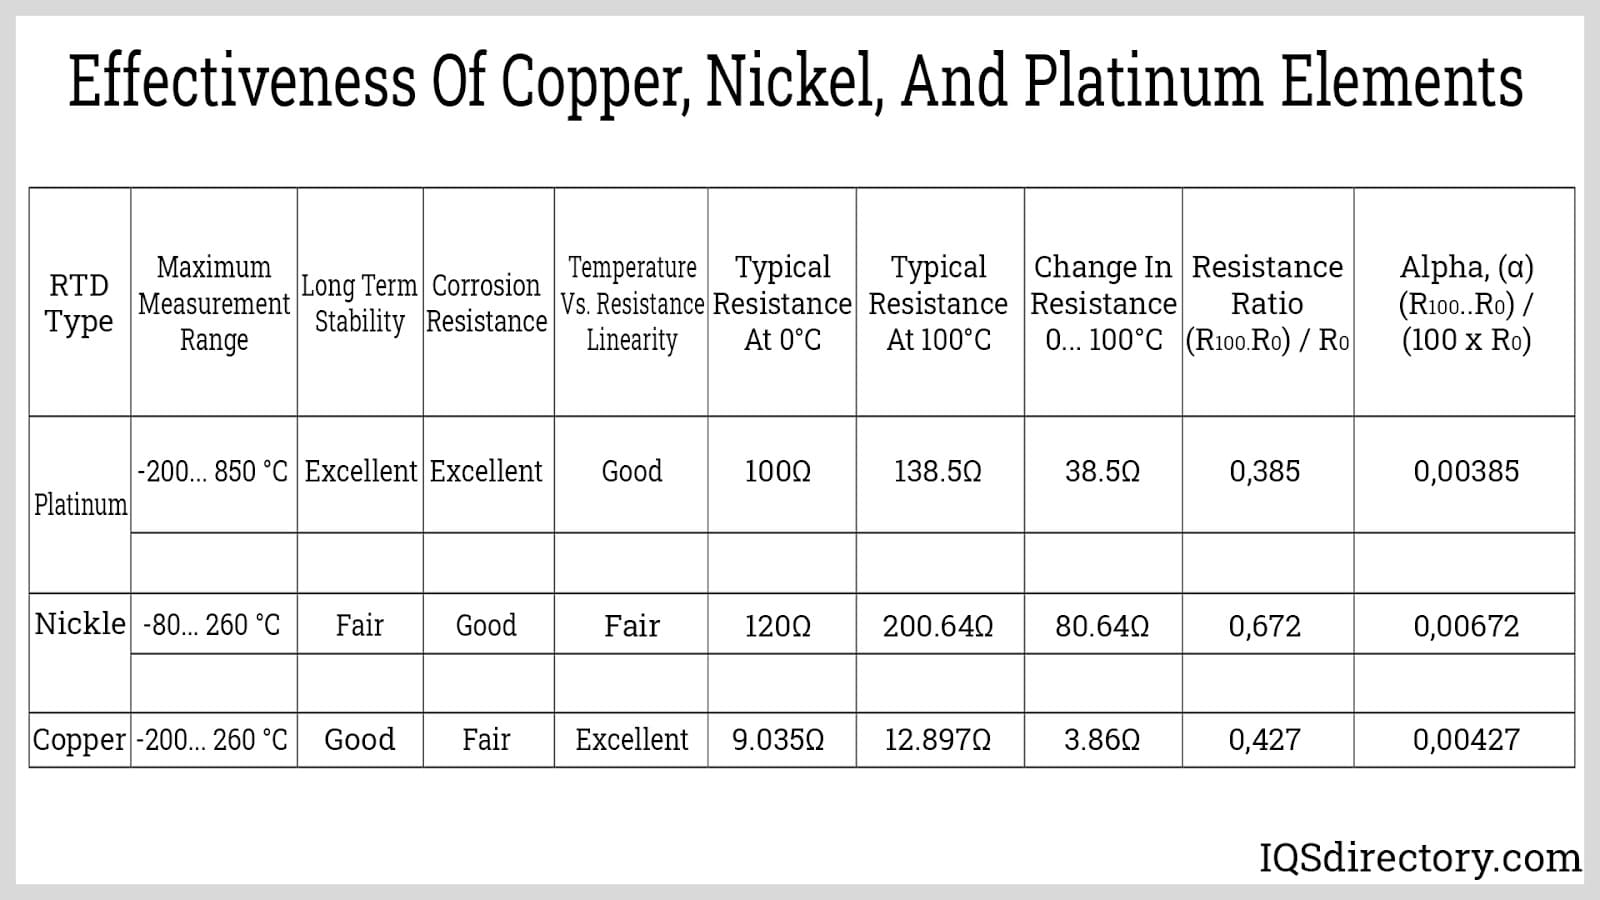 Effectiveness of Copper, Nickel, and Platinum Elements